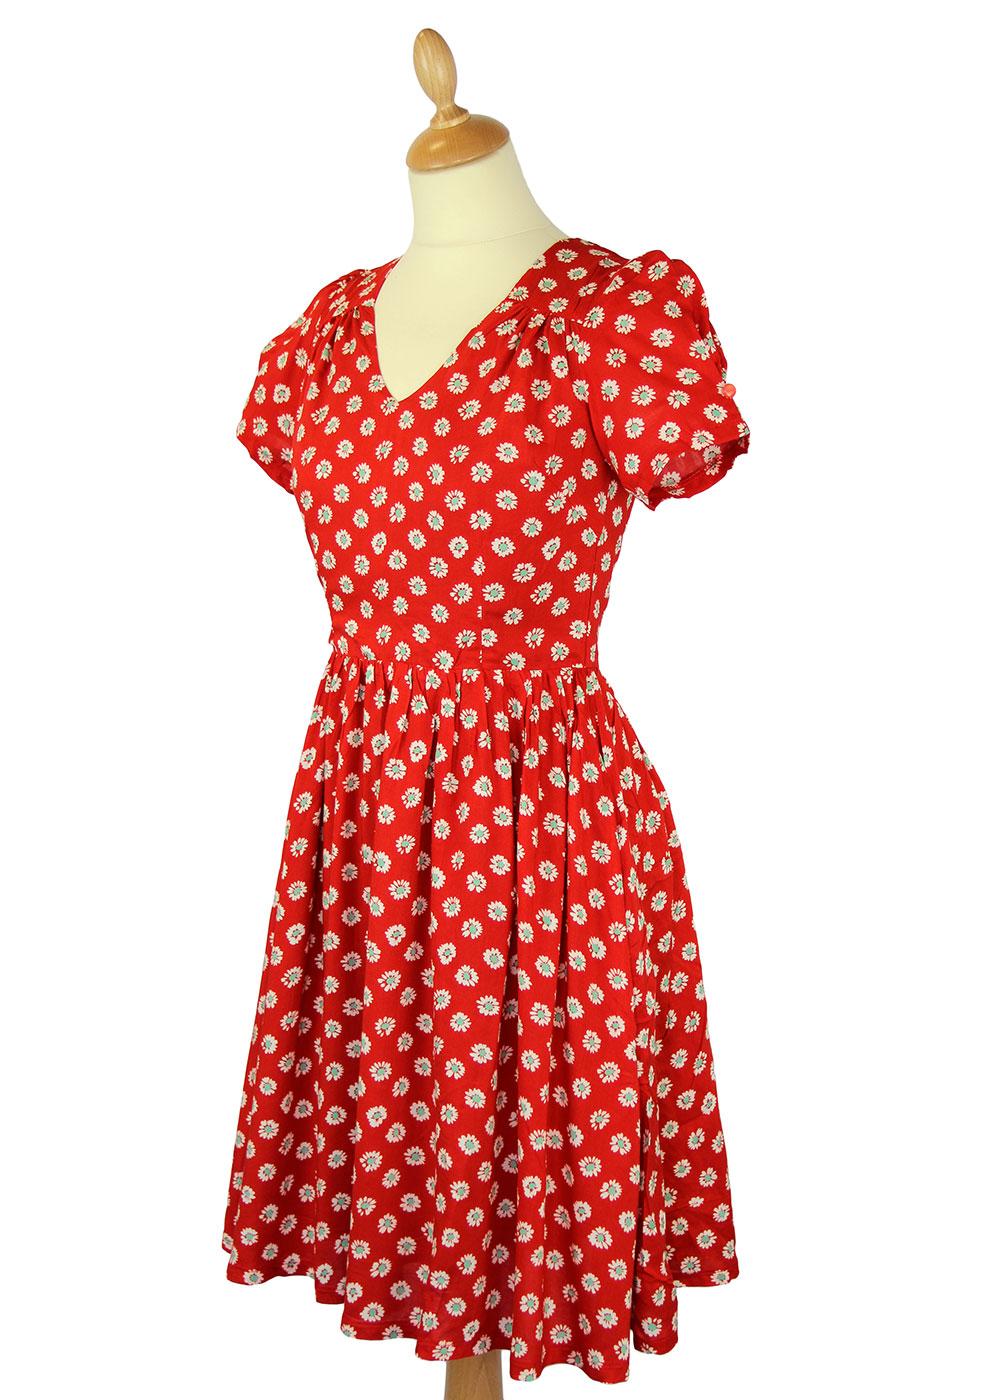 FRIDAY ON MY MIND Fleur Retro 50s Vintage Style Floral Dress Red